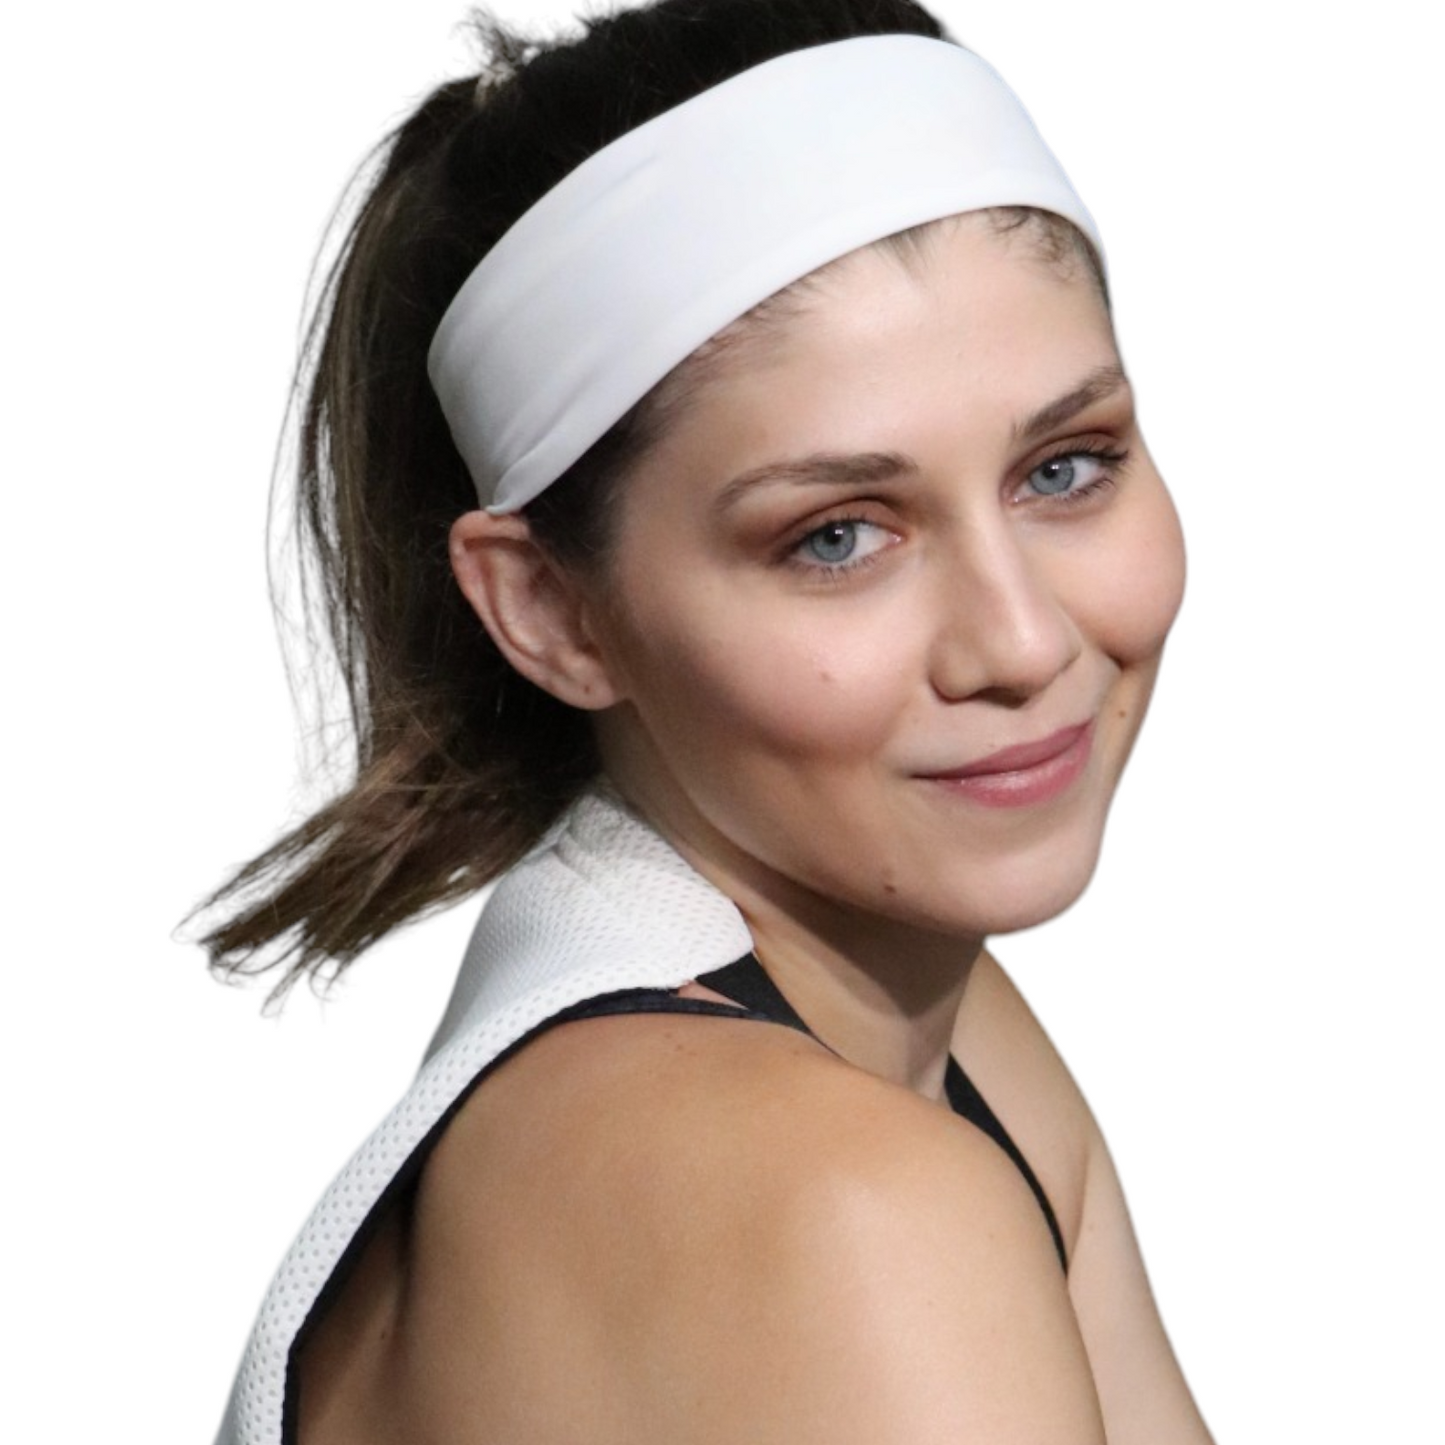 Athlete shown wearing Cooling Head Wrap in White